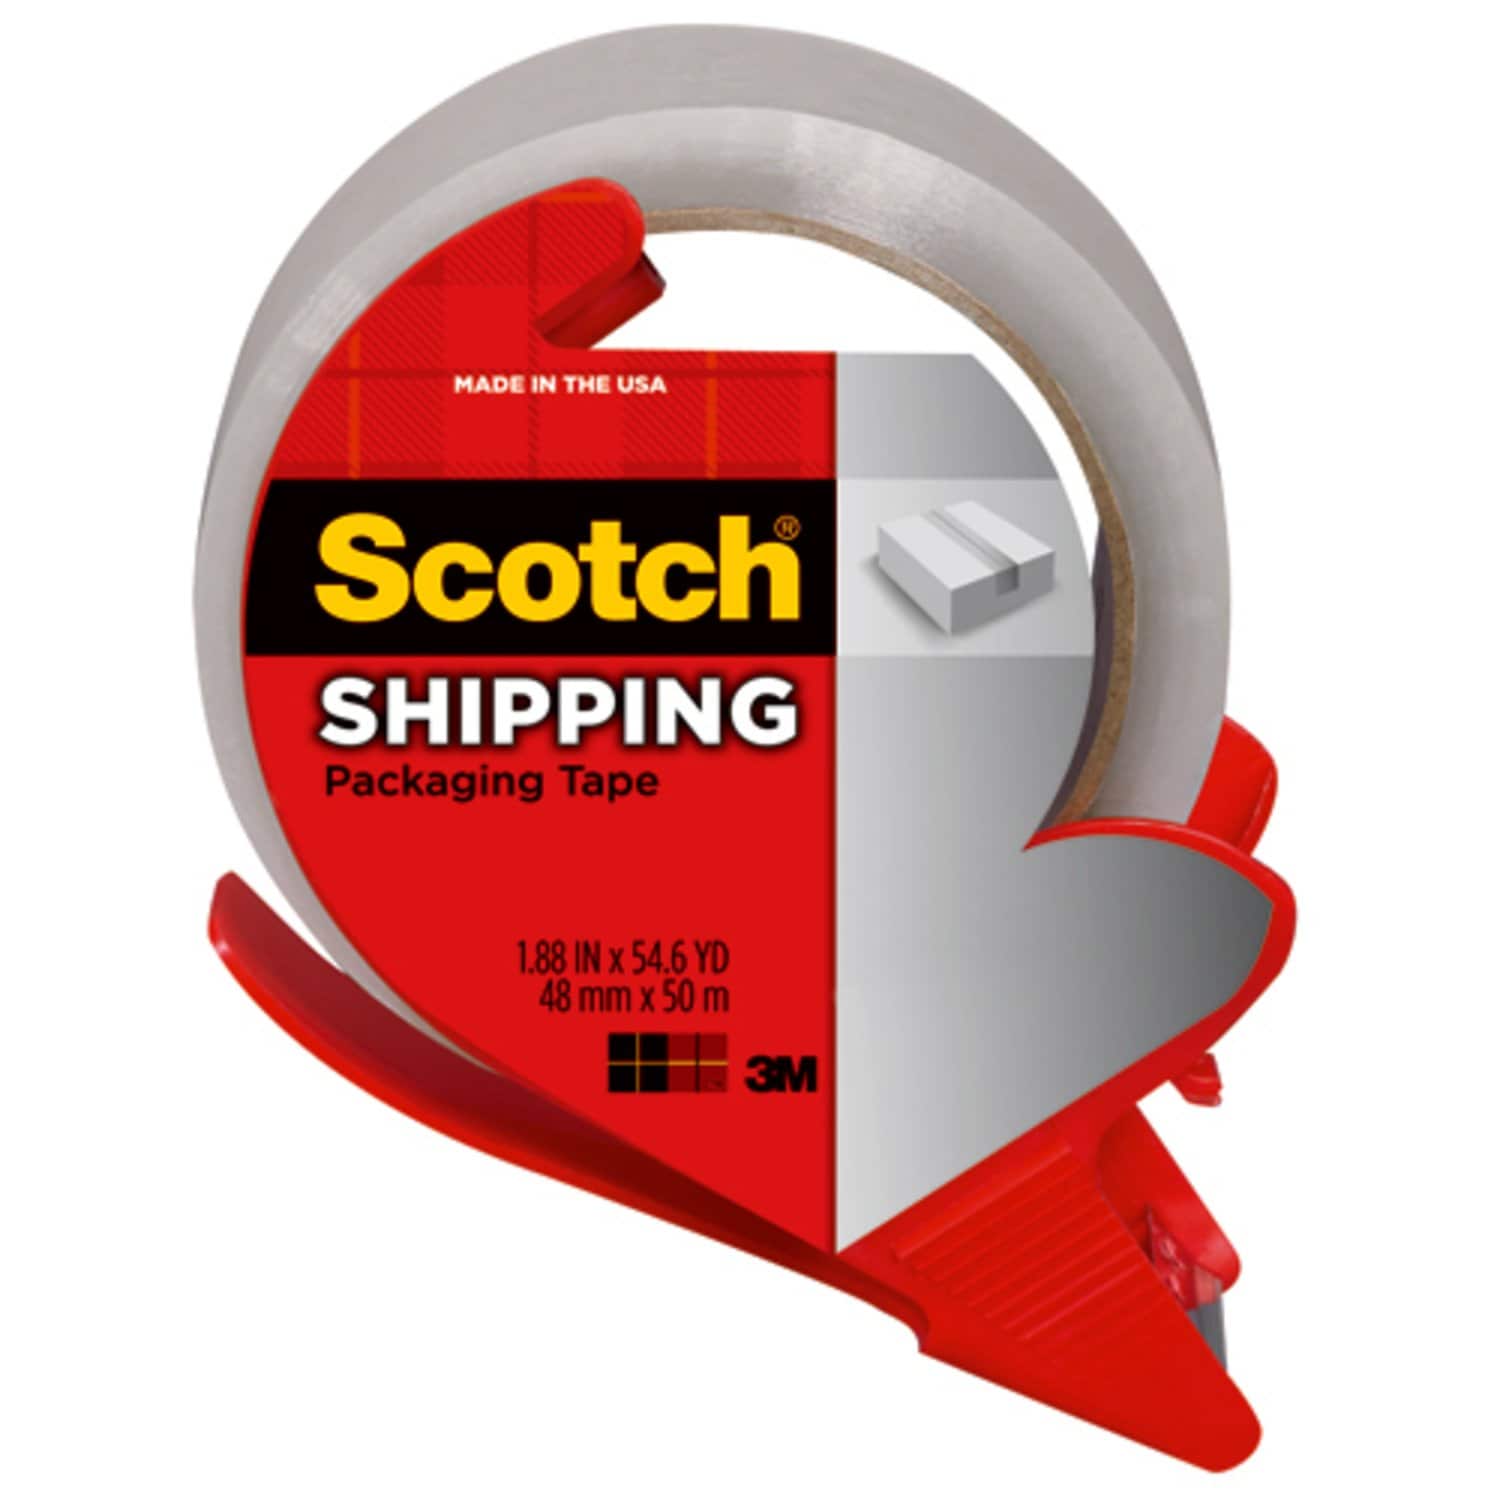 7100260715 - Scotch Shipping Packaging Tape 3350-RD-36GC, 1.88 in x 54.6 yd (48 mm x 50 m)